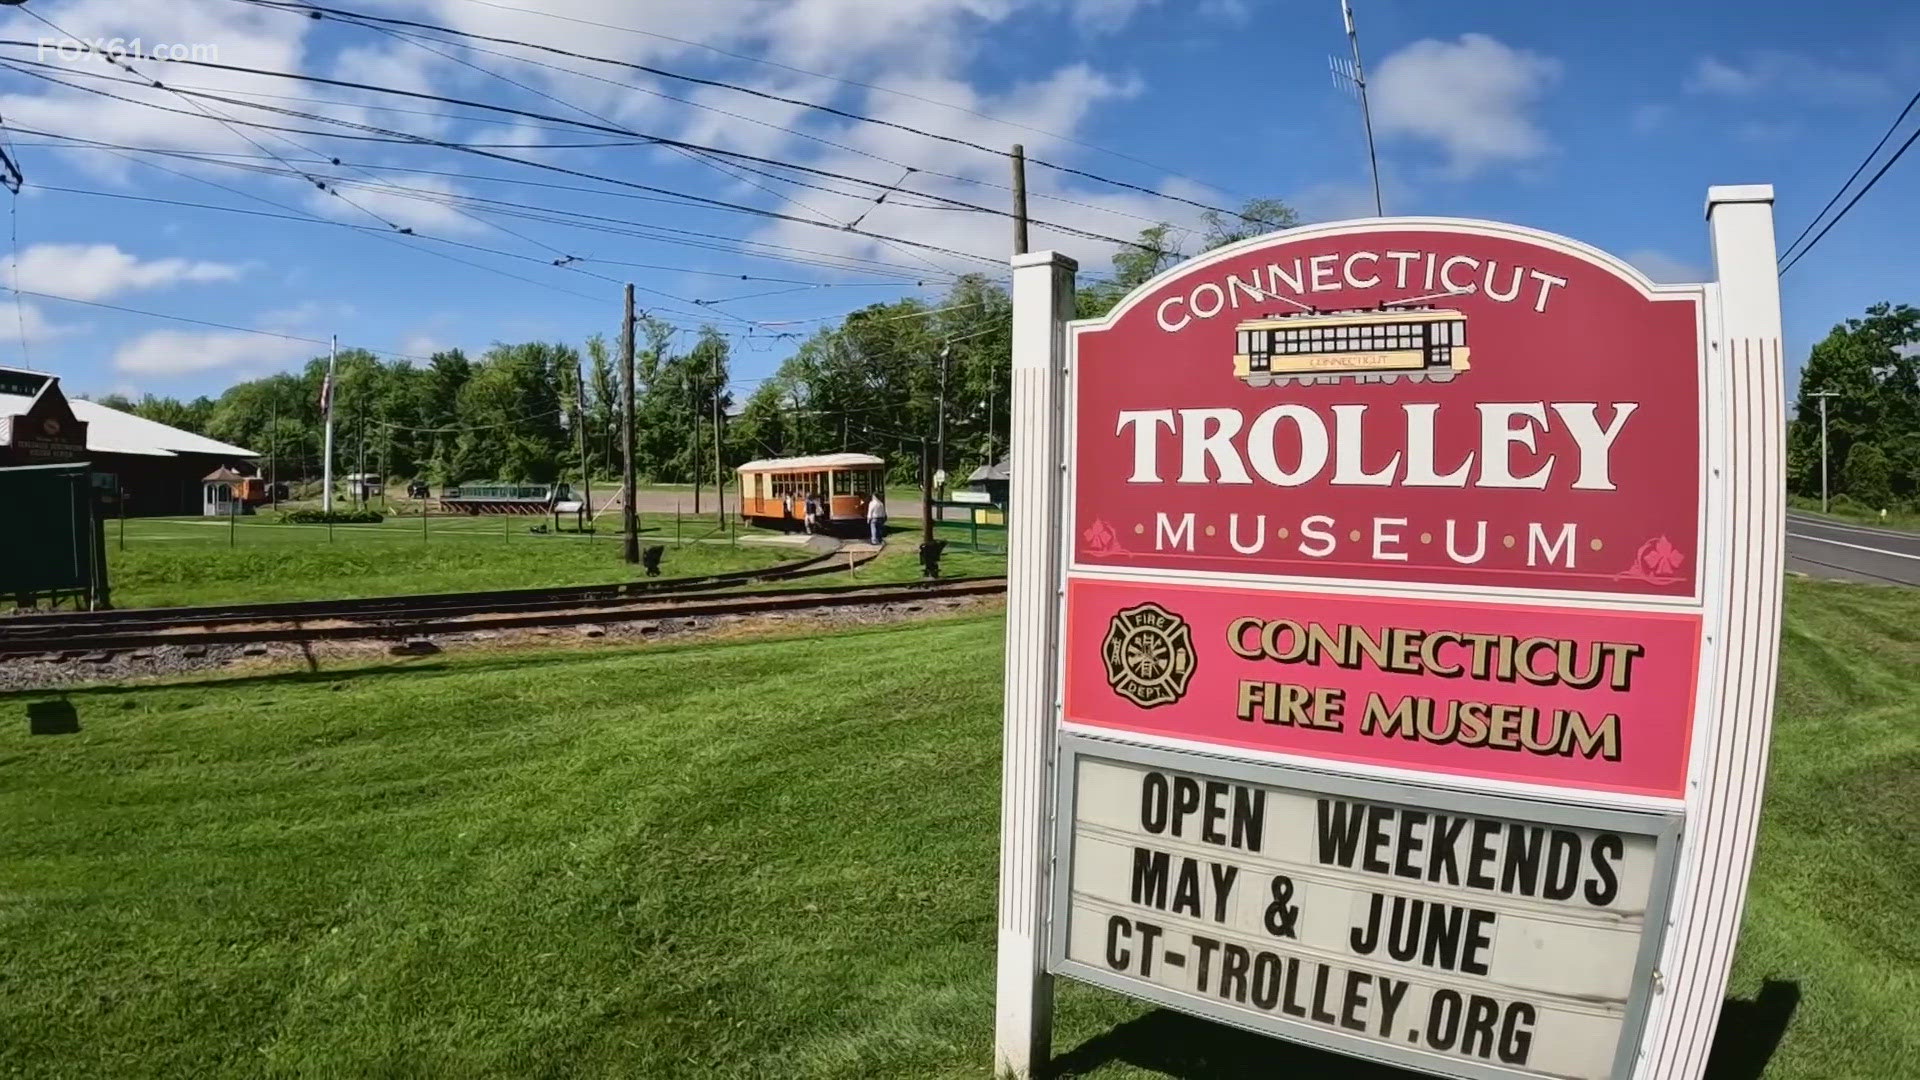 Connecticut Trolley Museum staff look to welcome more aboard their “rolling history."